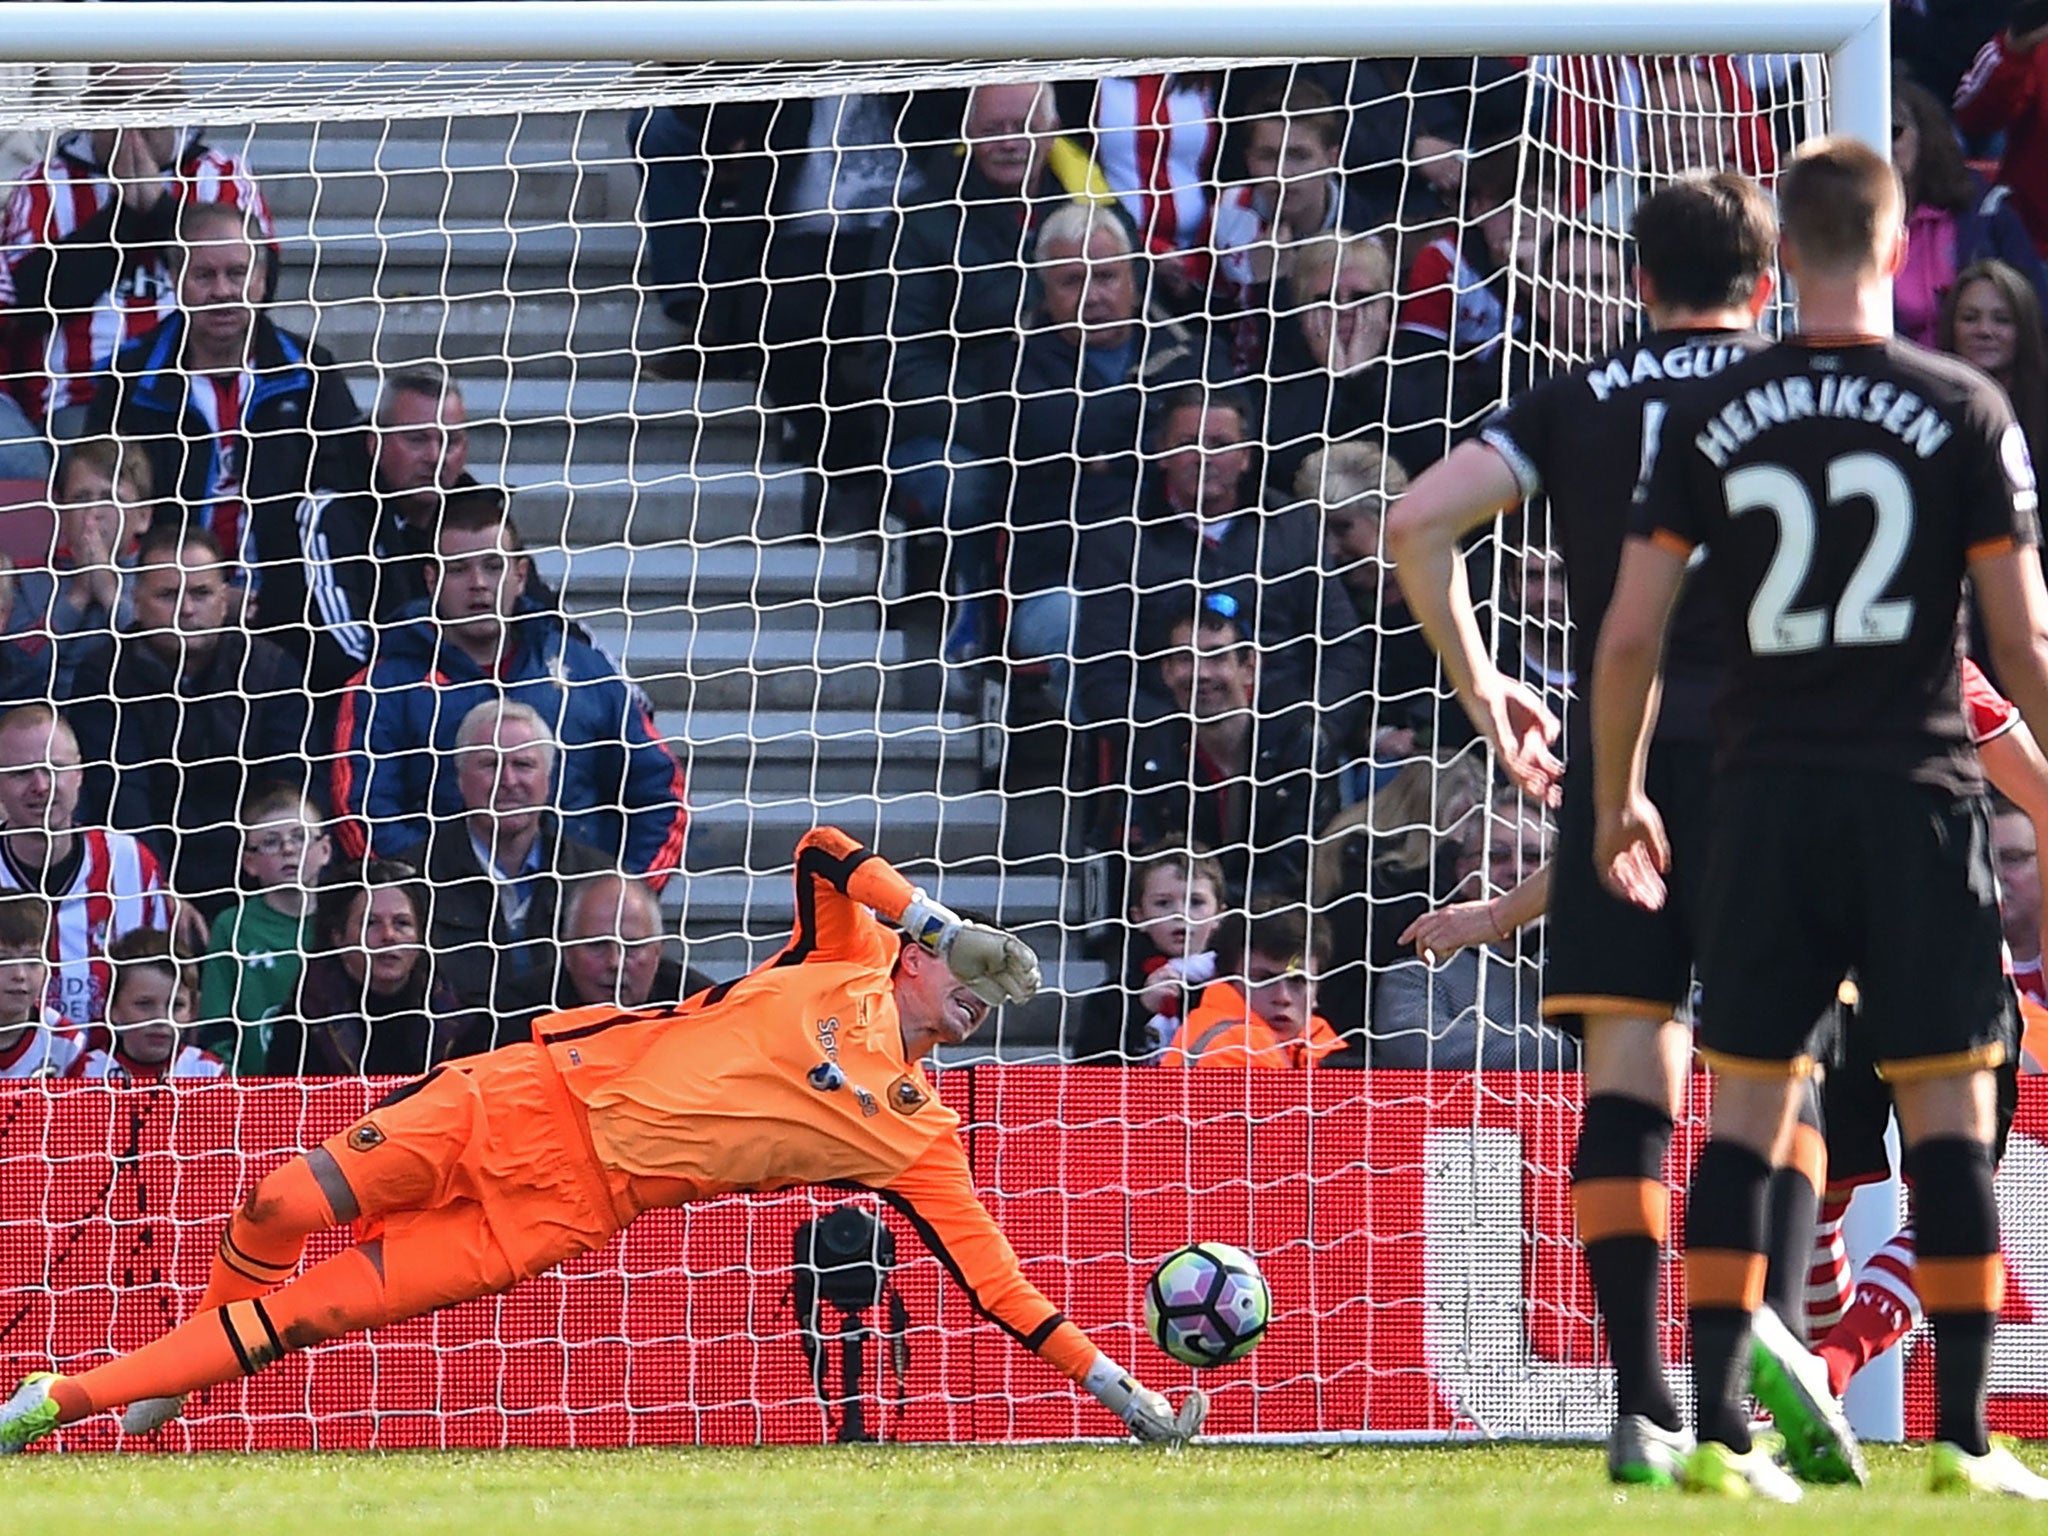 Eldin Jakupovic's penalty save confirmed Sunderland's relegation after their defeat by Bournemouth